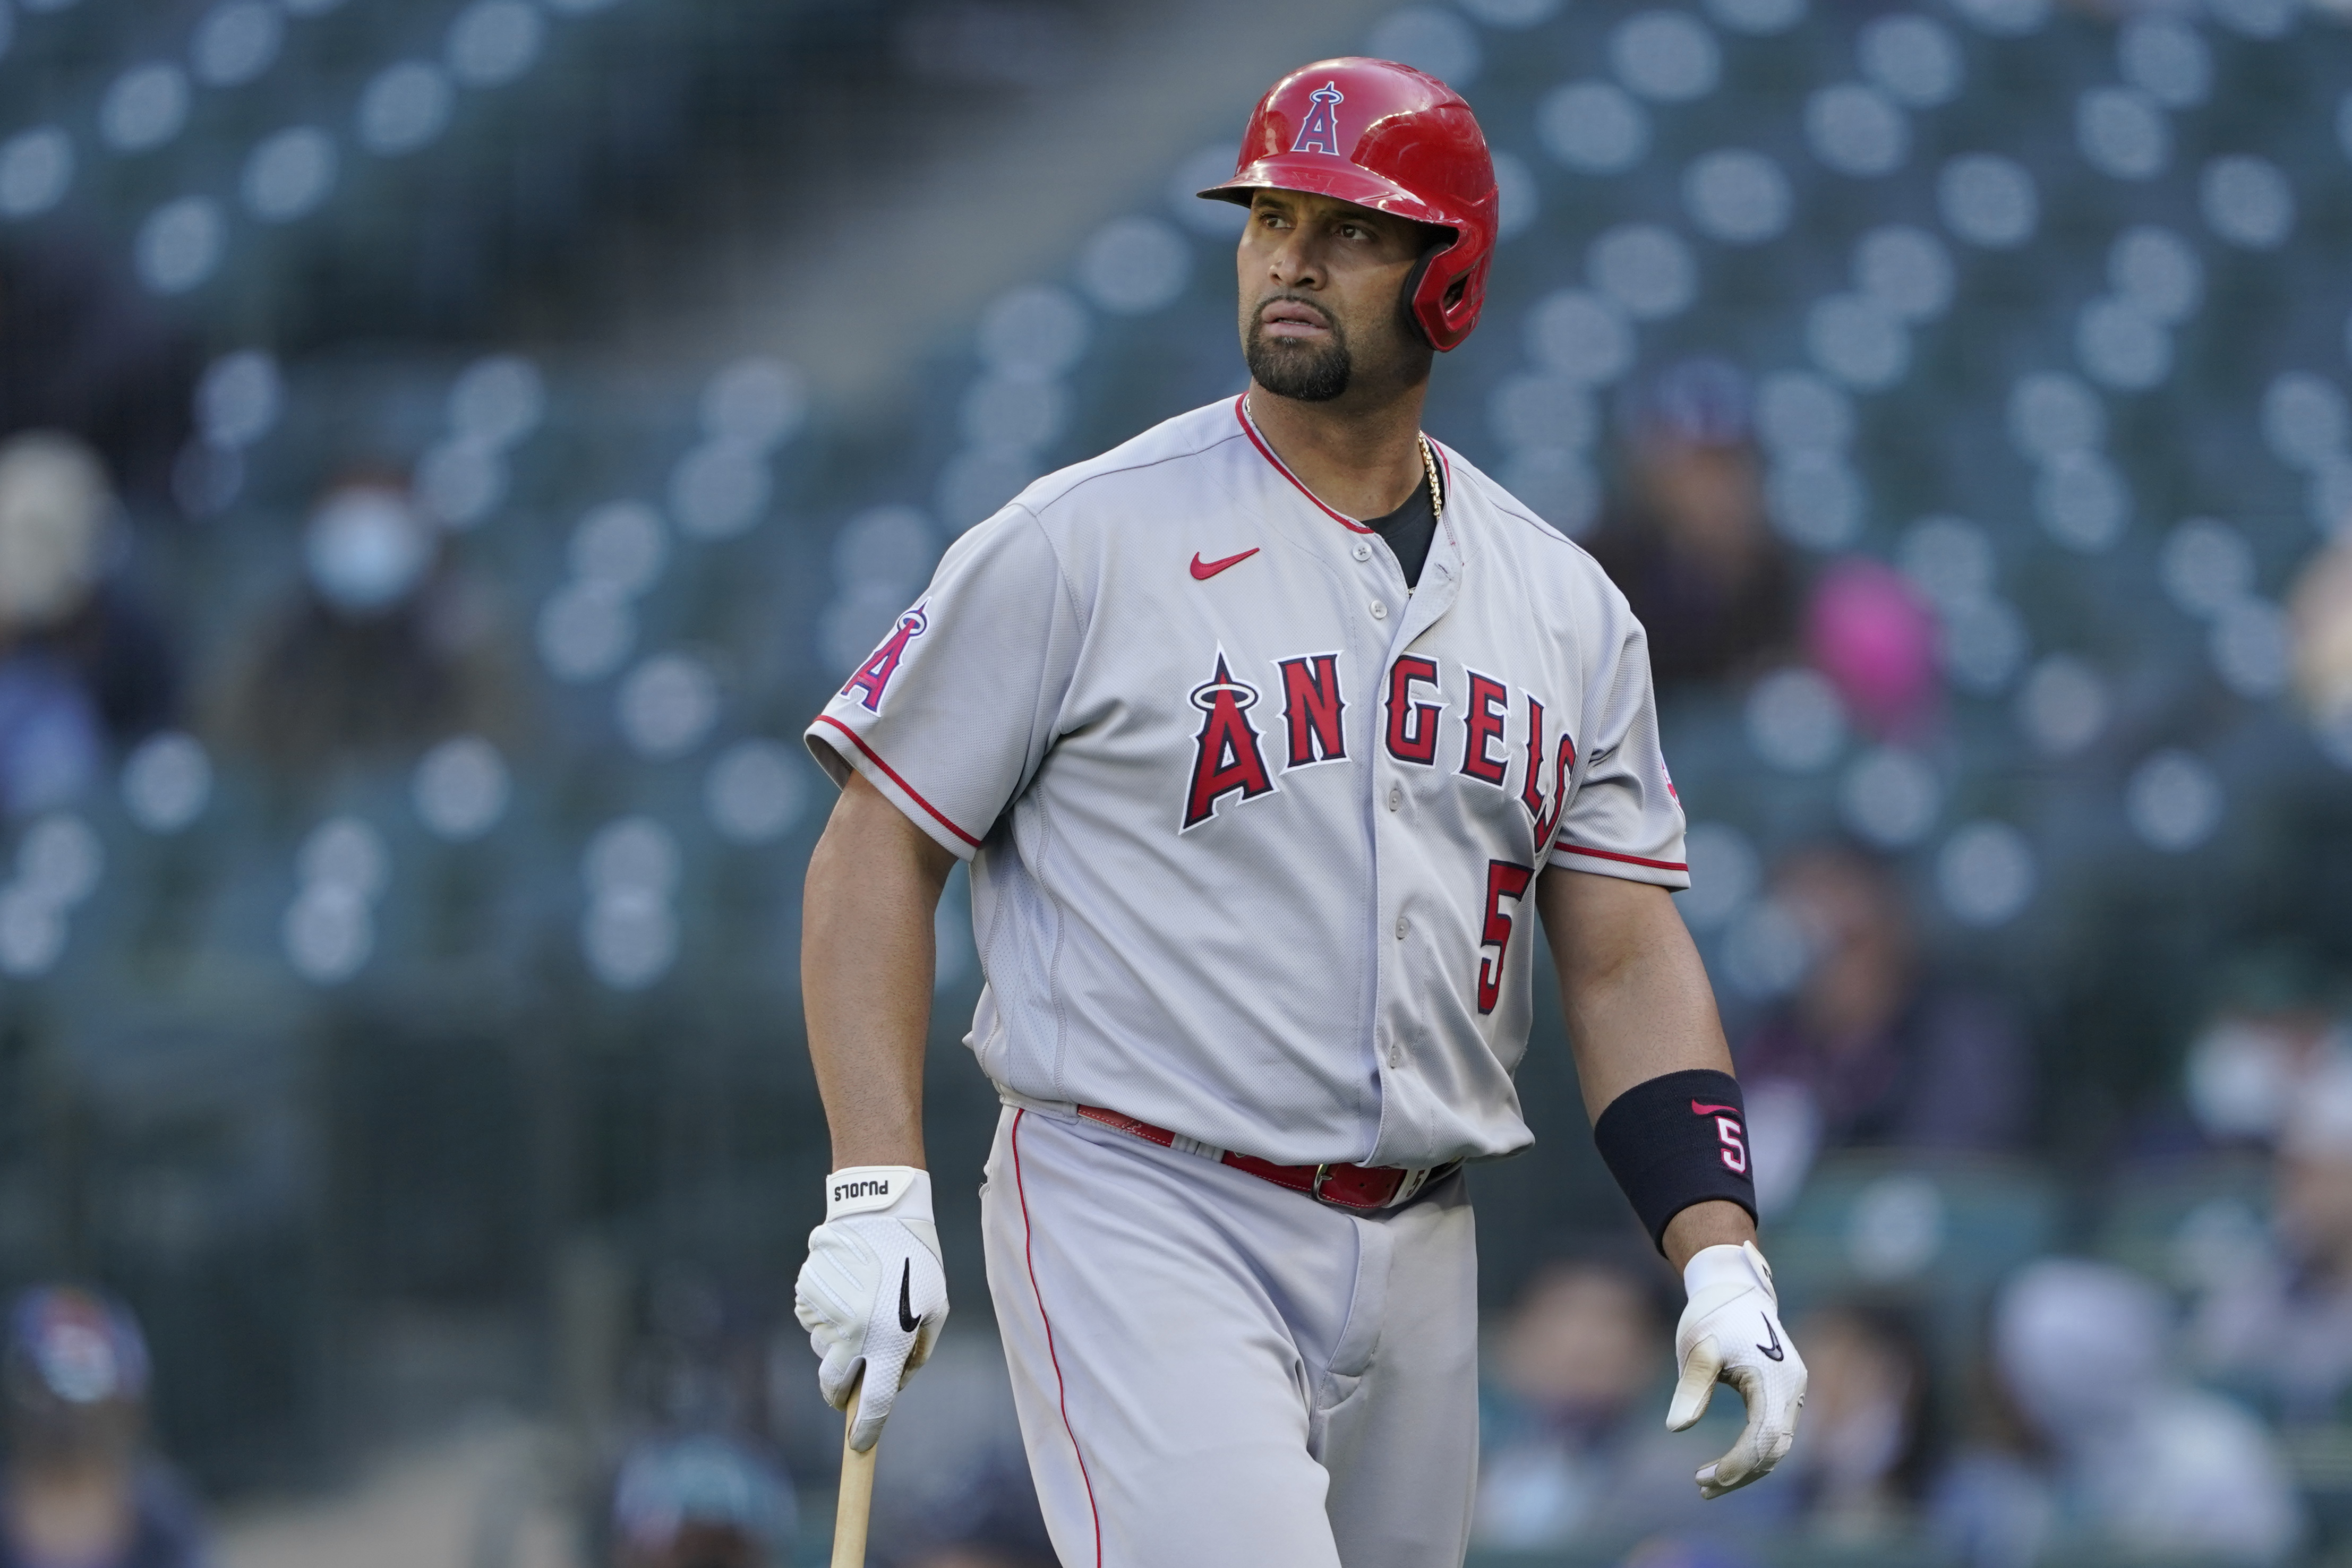 Albert Pujols named to All-Star game as legacy selection in final season